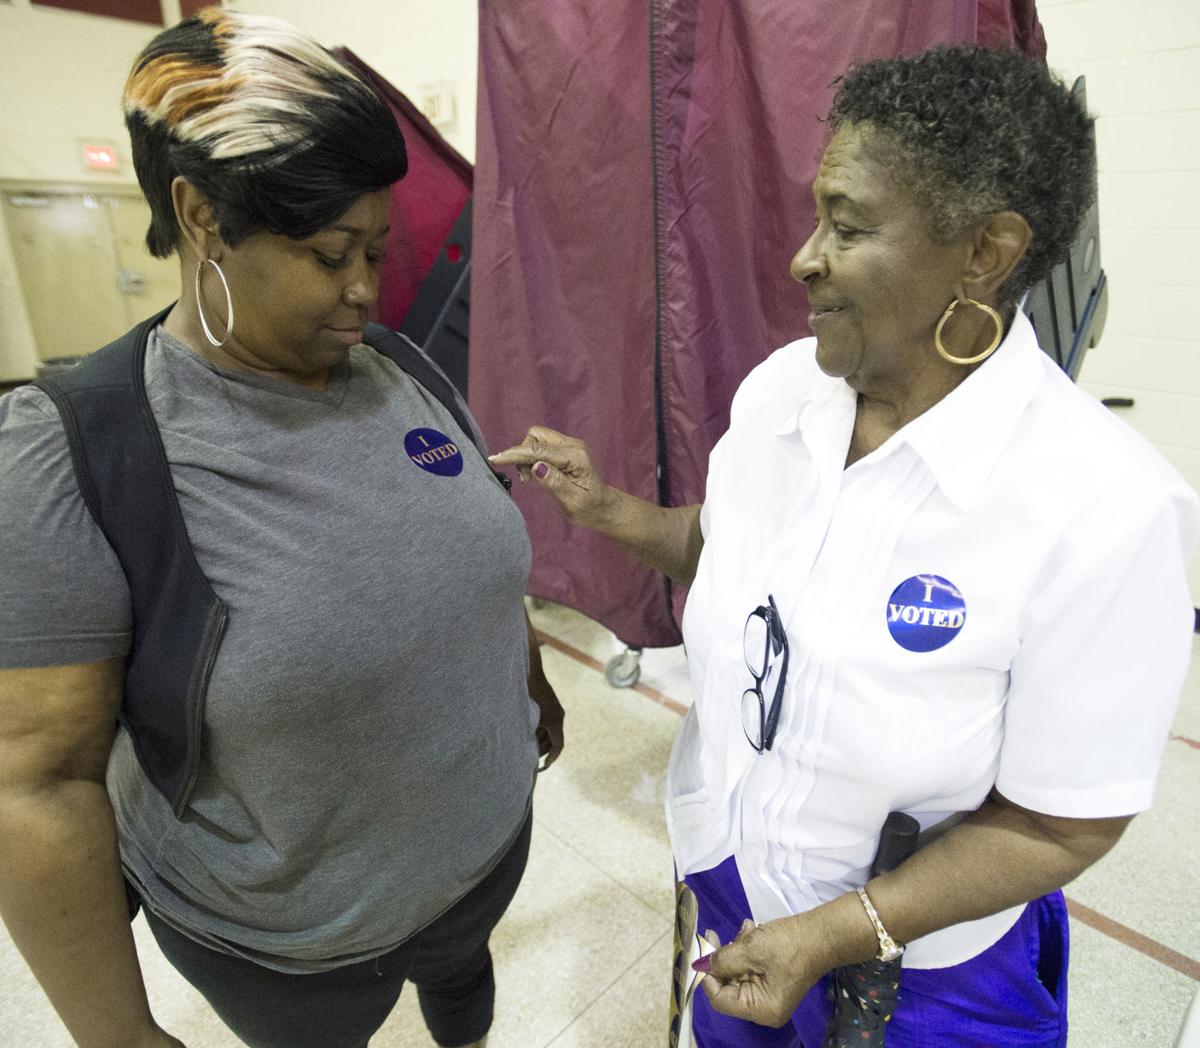 No Election Day voting sticker? Louisiana Secretary of State blames budget | Elections ...